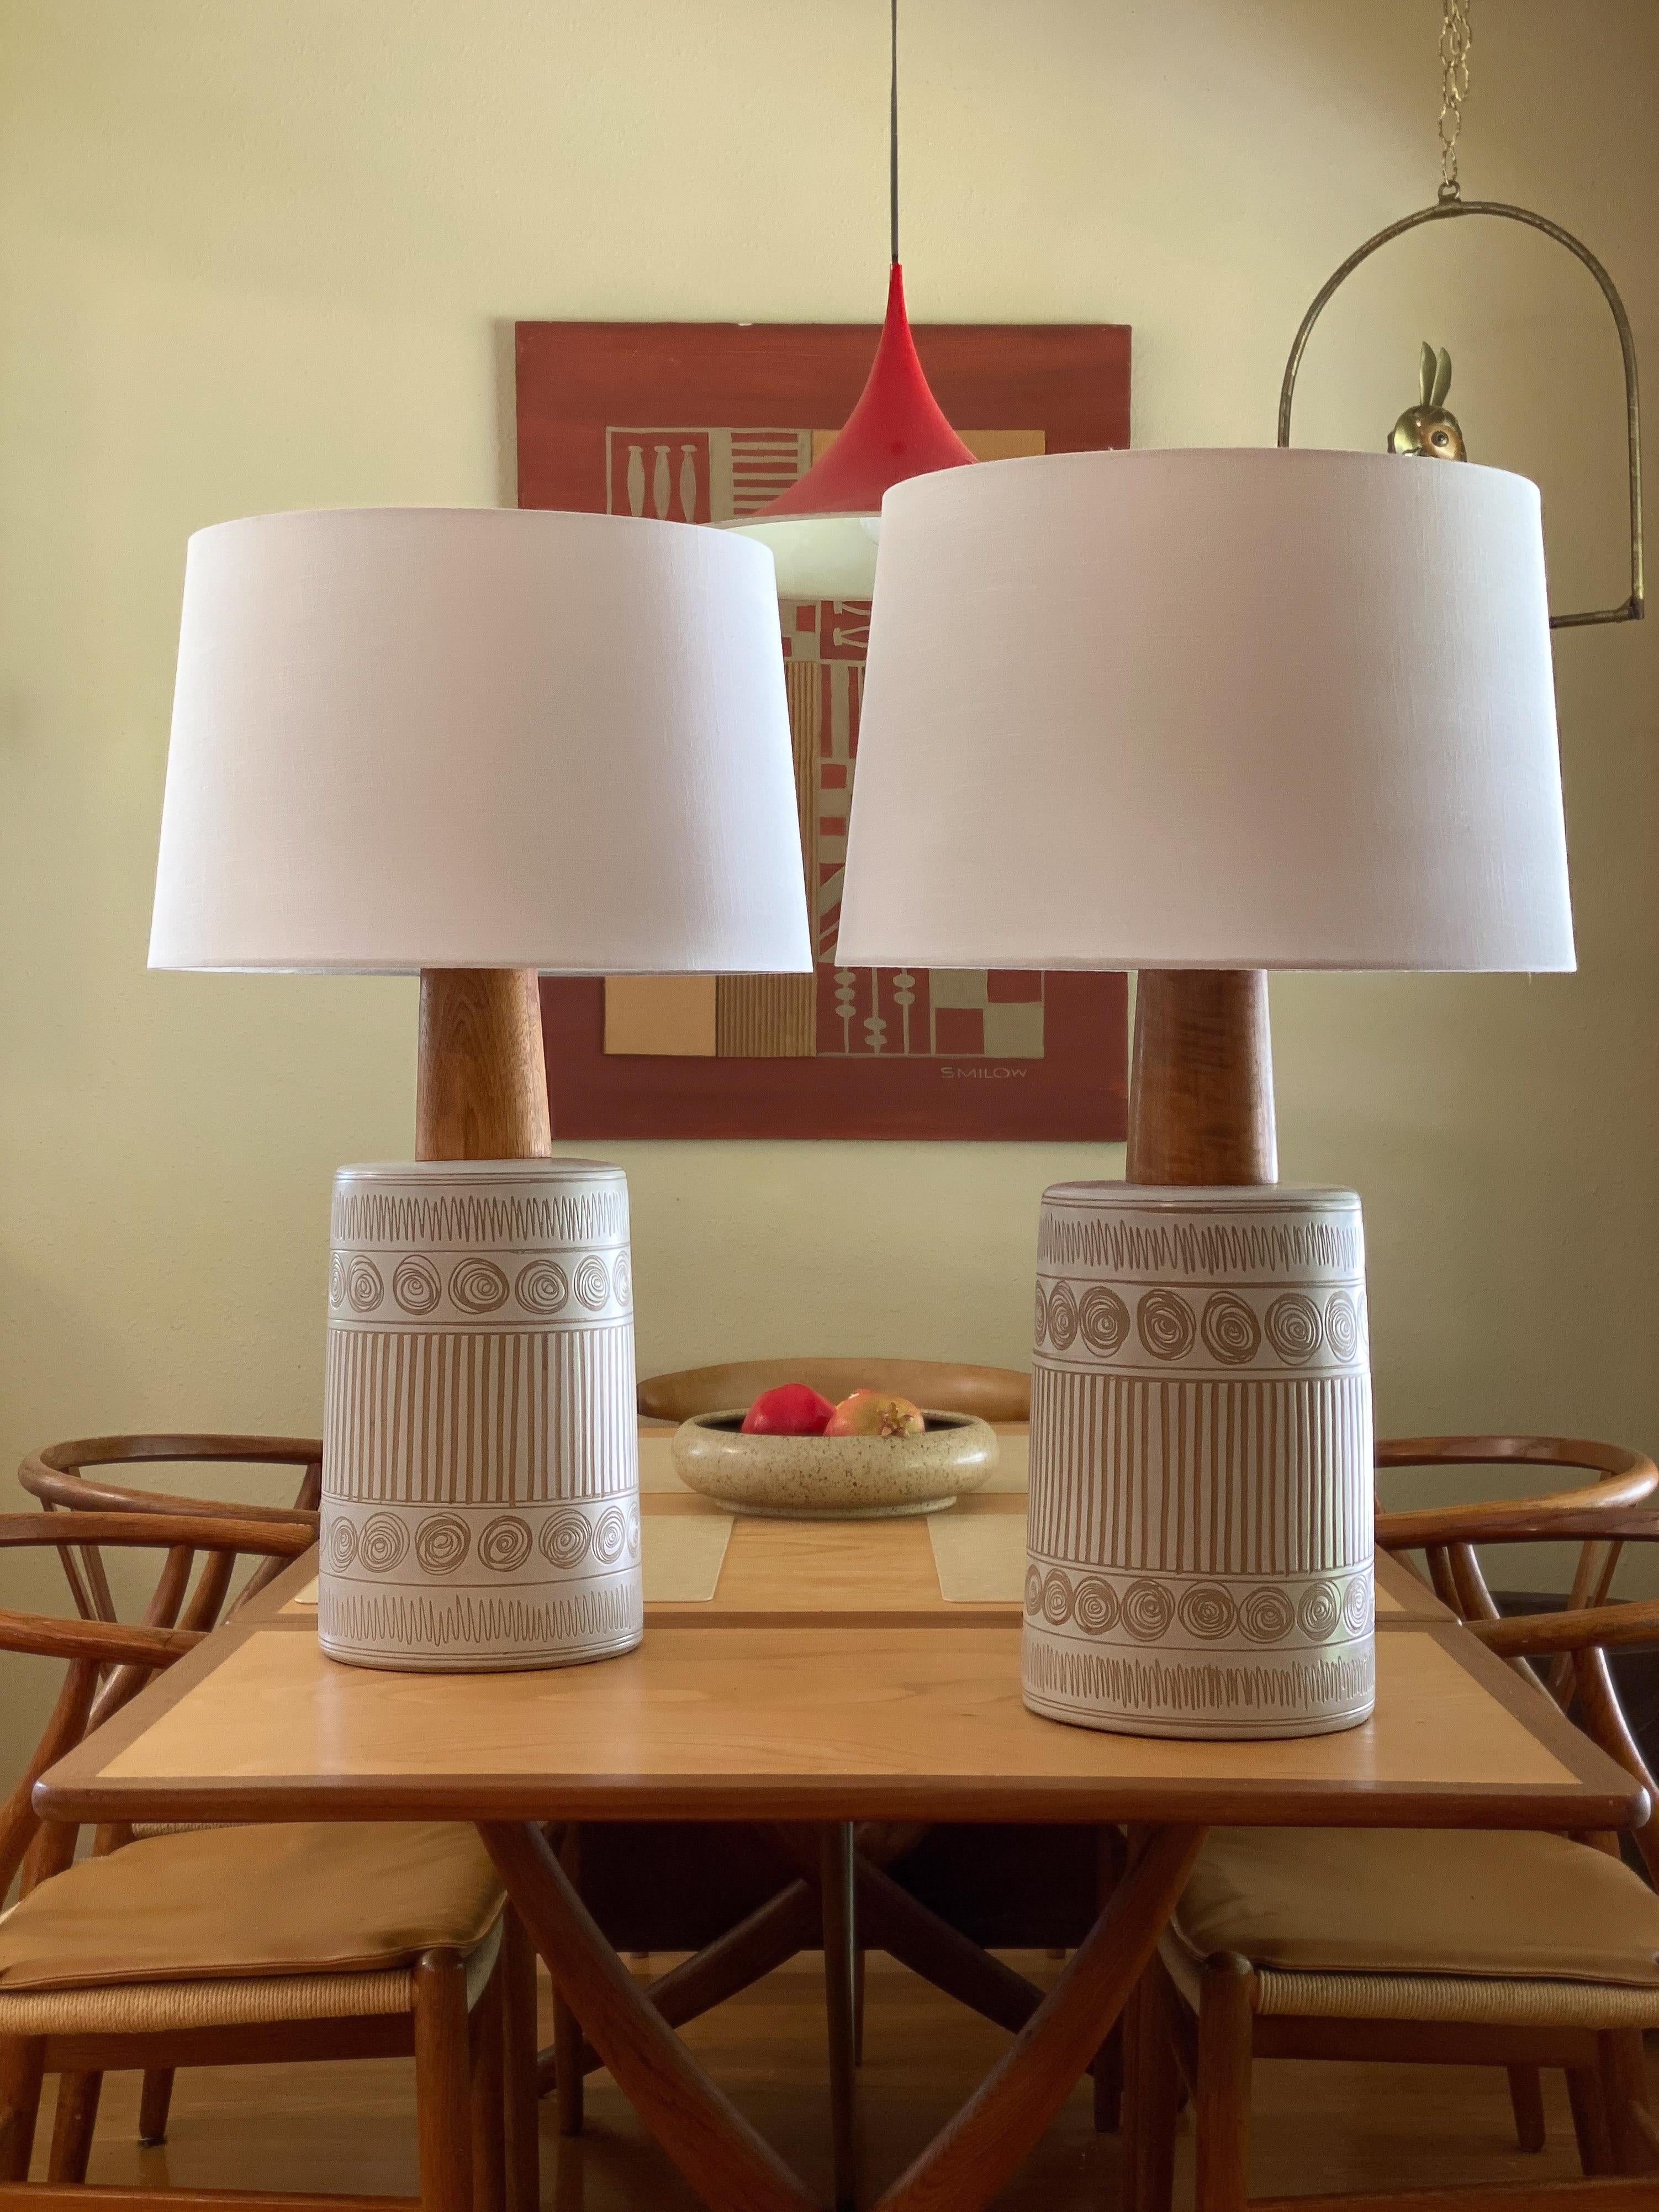 Pair of elegant table lamps by ceramicist duo Jane and Gordon Martz for Marshall Studios. Features wonderful sgraffito decorations on a flat white glazed body. Details are outstanding, walnut neck and finials and brand new shades.

Overall